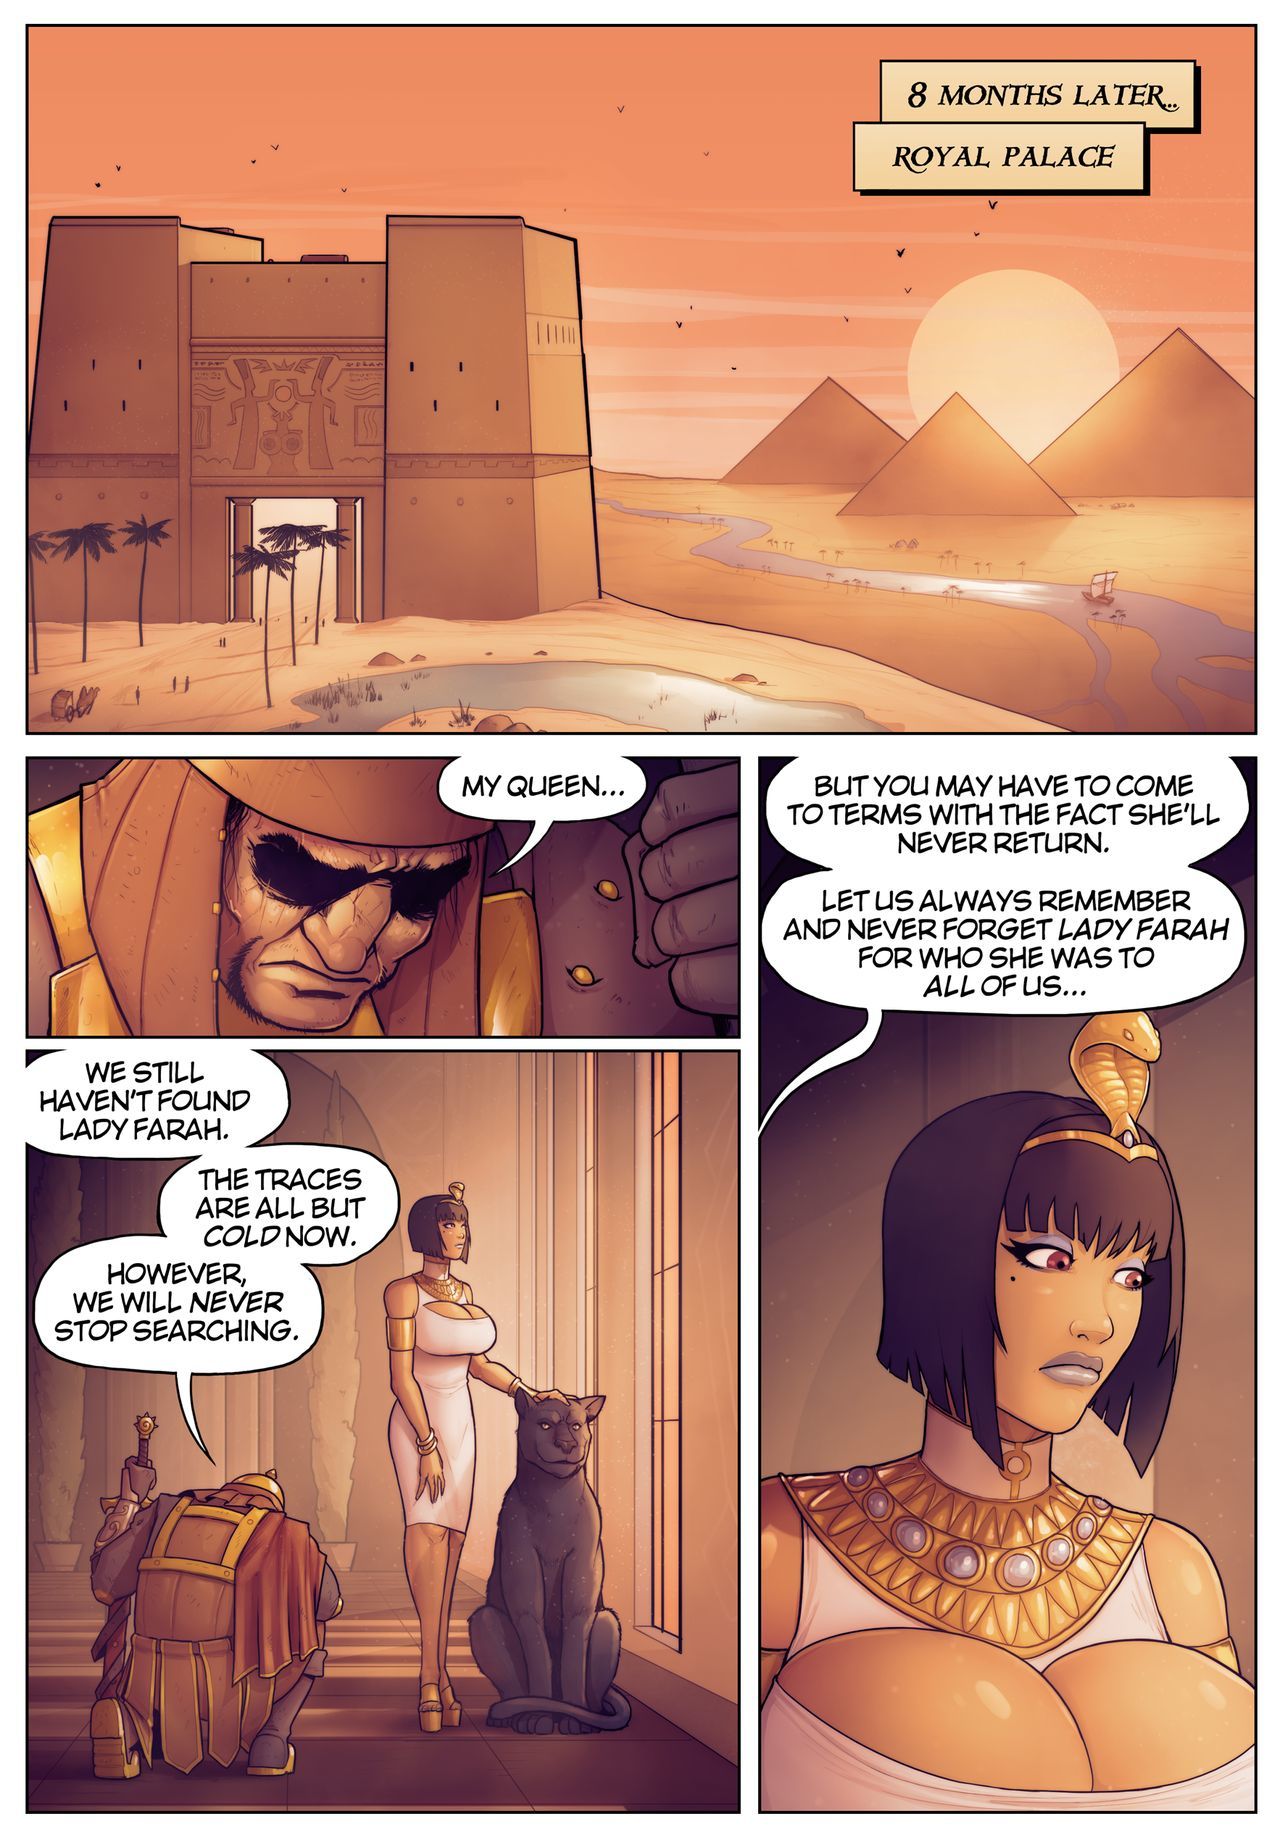 Legend of Queen Opala -Tales of Pharah: In the Shadow of Anubis*